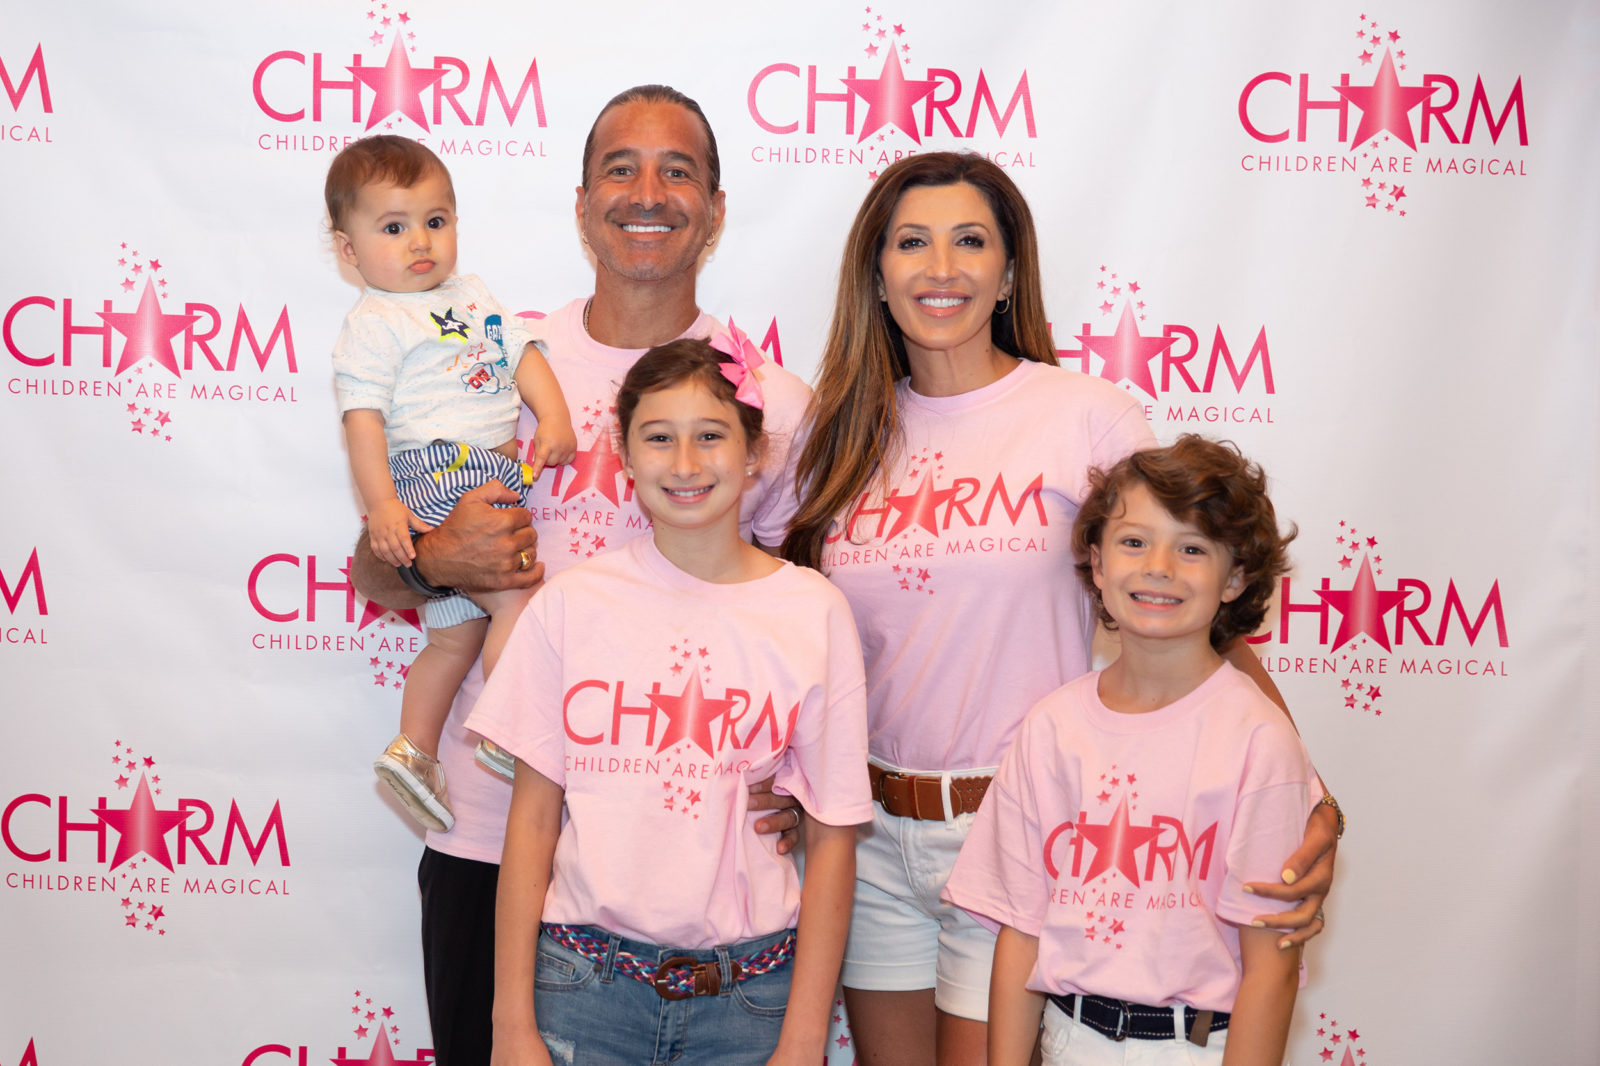 Jaclyn Stapp, husband Scott Stapp from Creed and touring solo artist, pictured with their three children at the CHARM fundraiser.